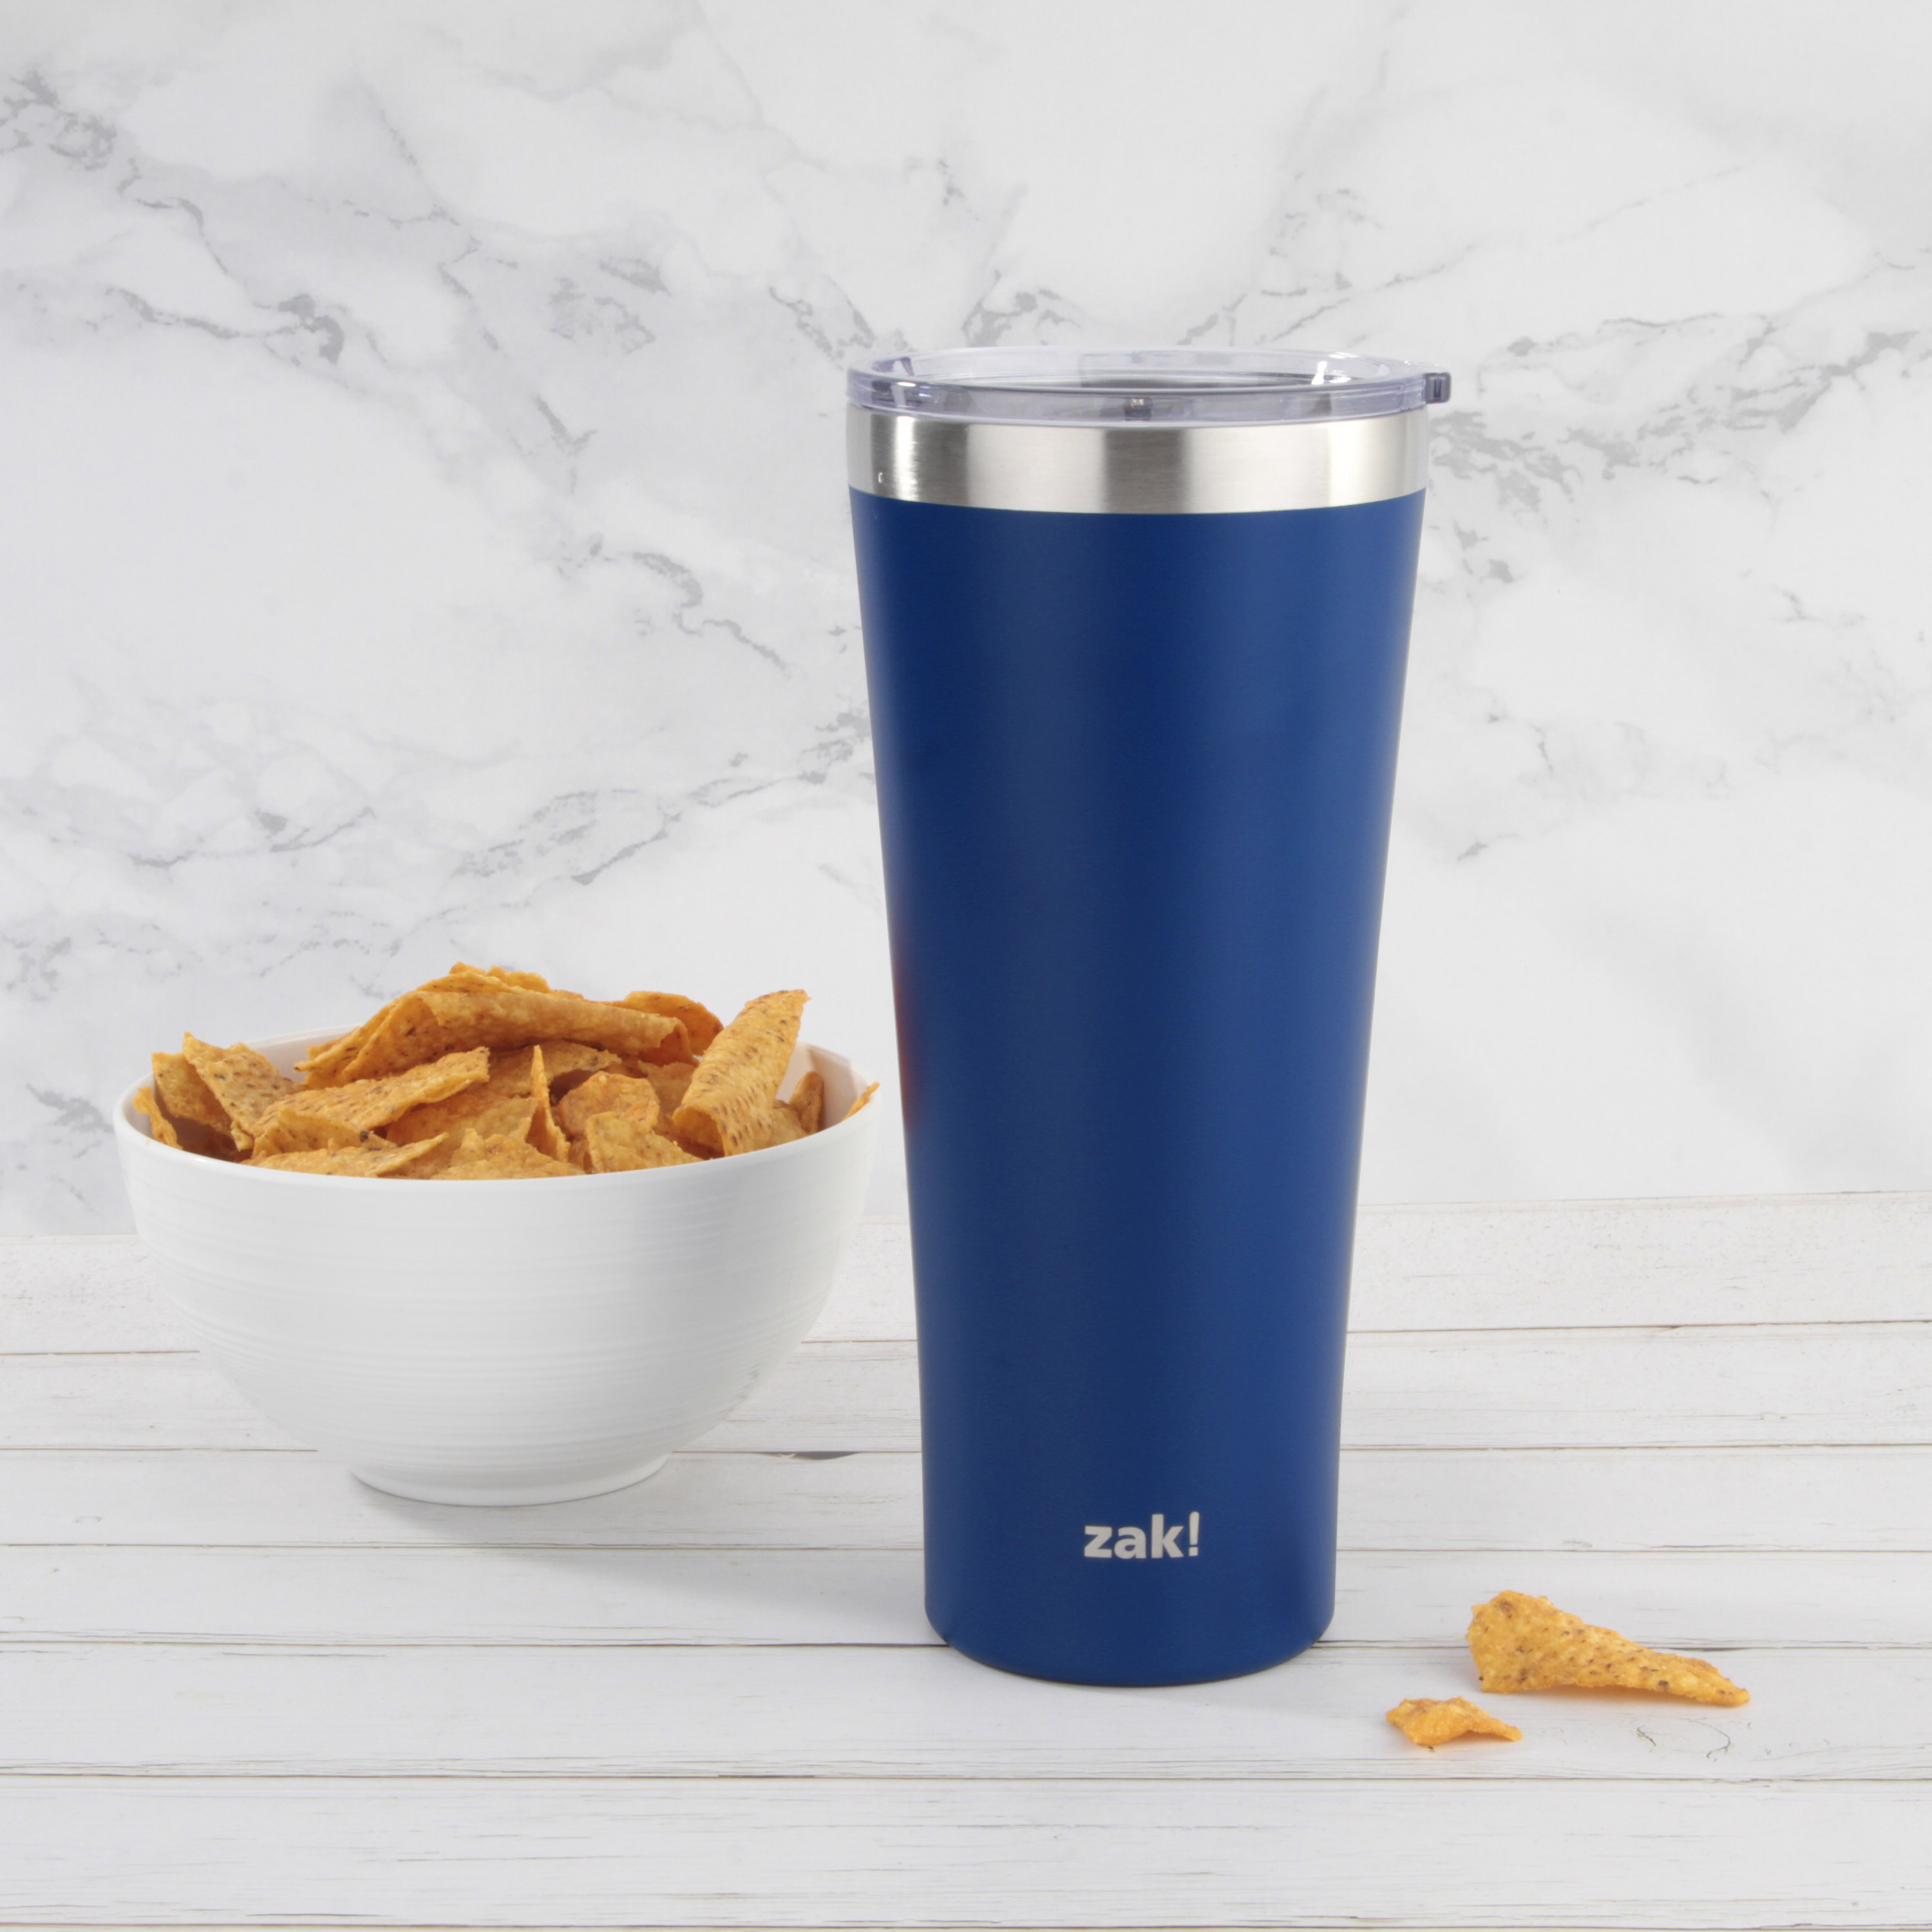 Zak Hydration 30 ounce Vacuum Insulated Stainless Steel Tumbler, Vin Scully, 2-piece set slideshow image 3